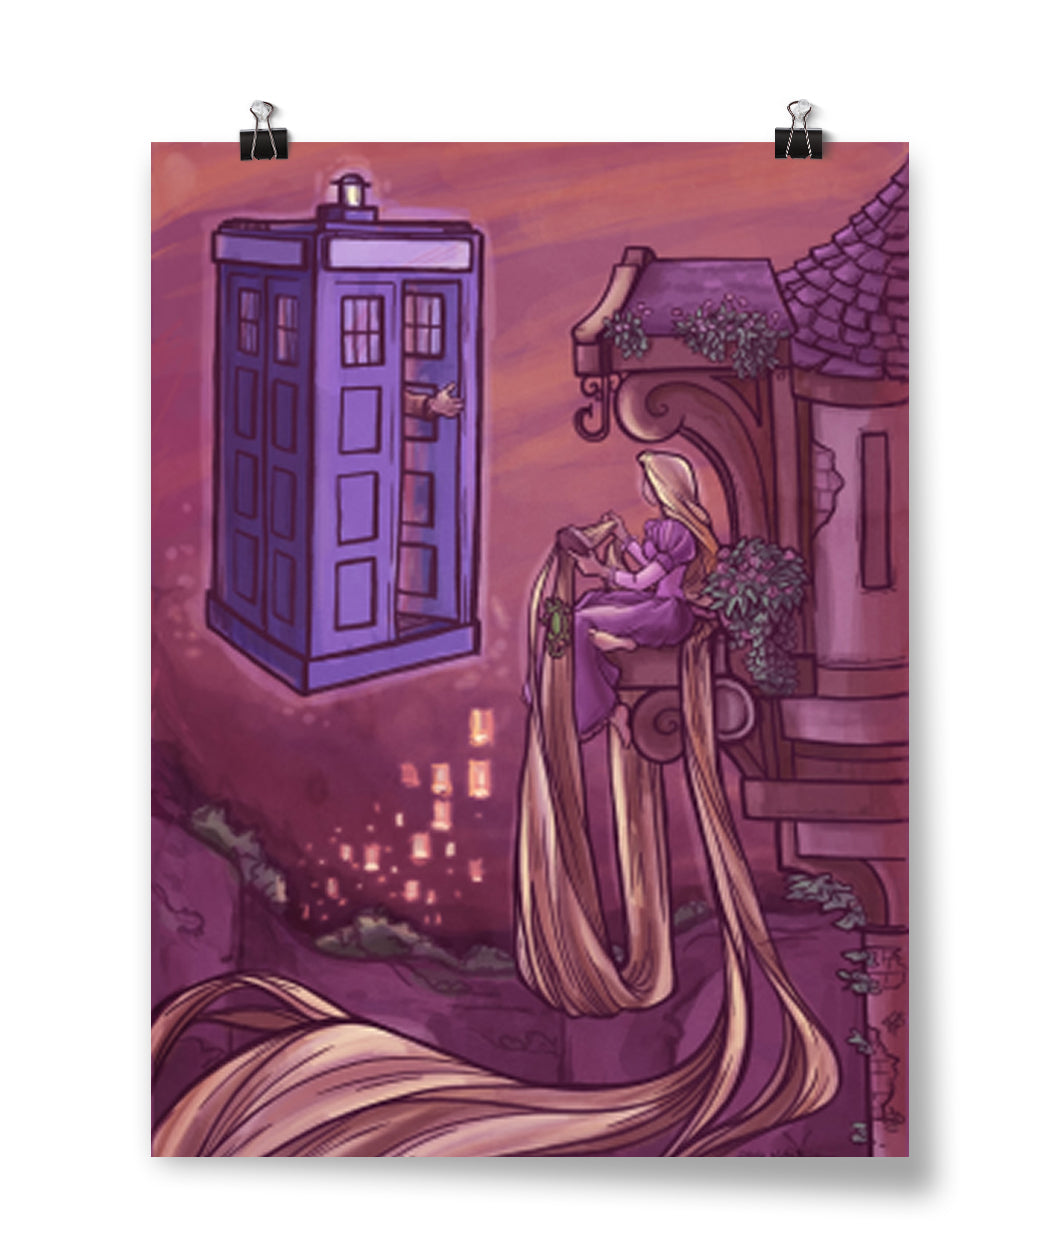 A poster showing Rapunzel in her tower, brushing her hair. Floating in the air in the phone booth from Doctor Who with a hand reaching out. From Karen Hallion. 